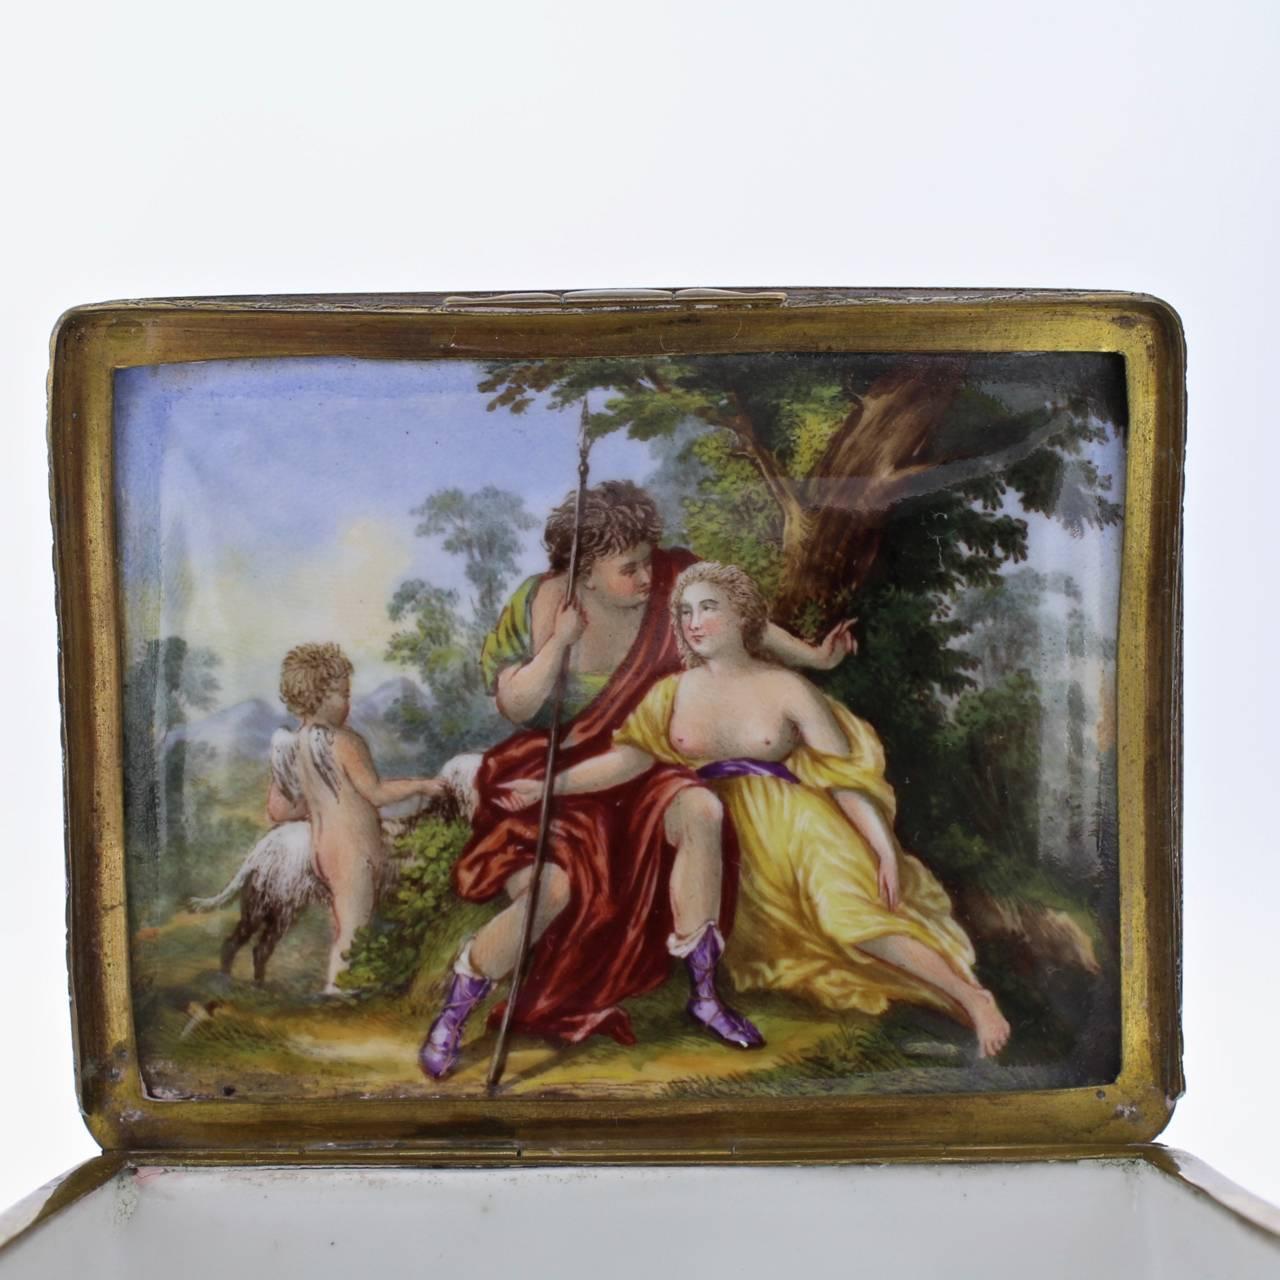 Antique South Staffordshire or Battersea Enamel Table Snuff Box, 18th Century In Good Condition For Sale In Philadelphia, PA